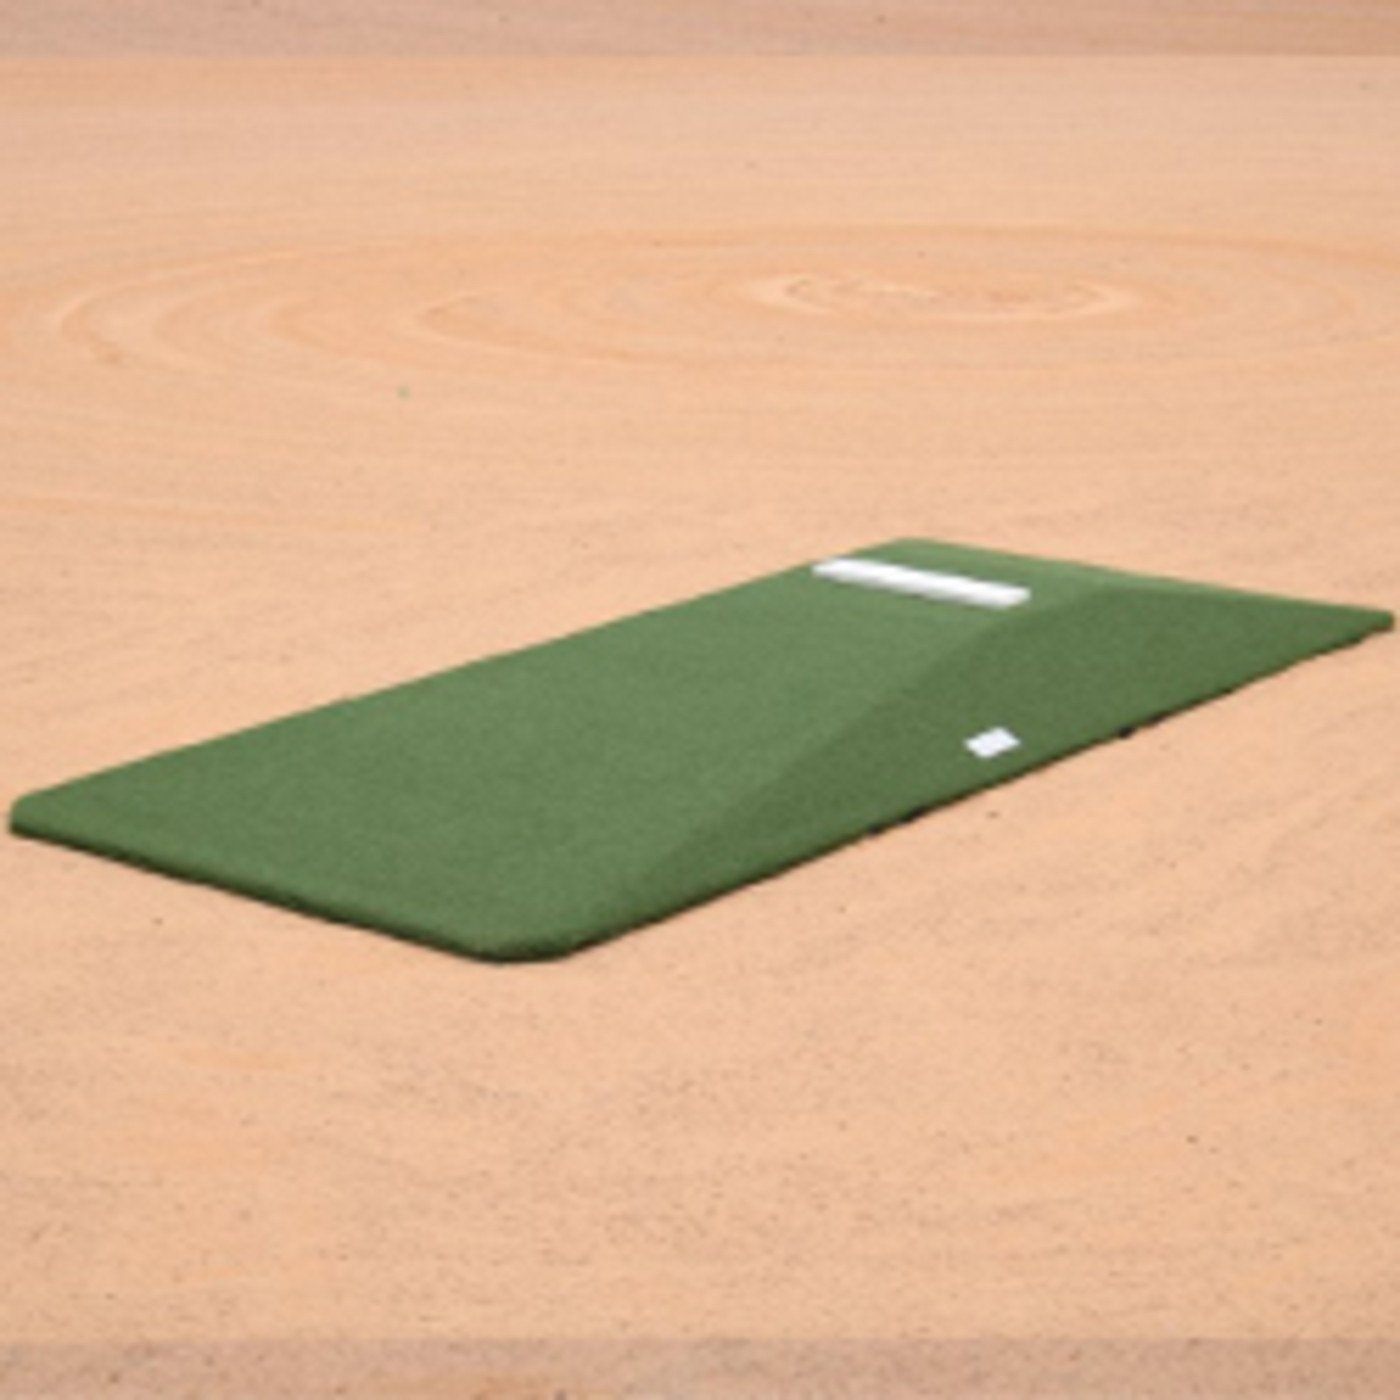 Little League Portable Game 'Prep' Pitching Mound - Pitch Pro Direct